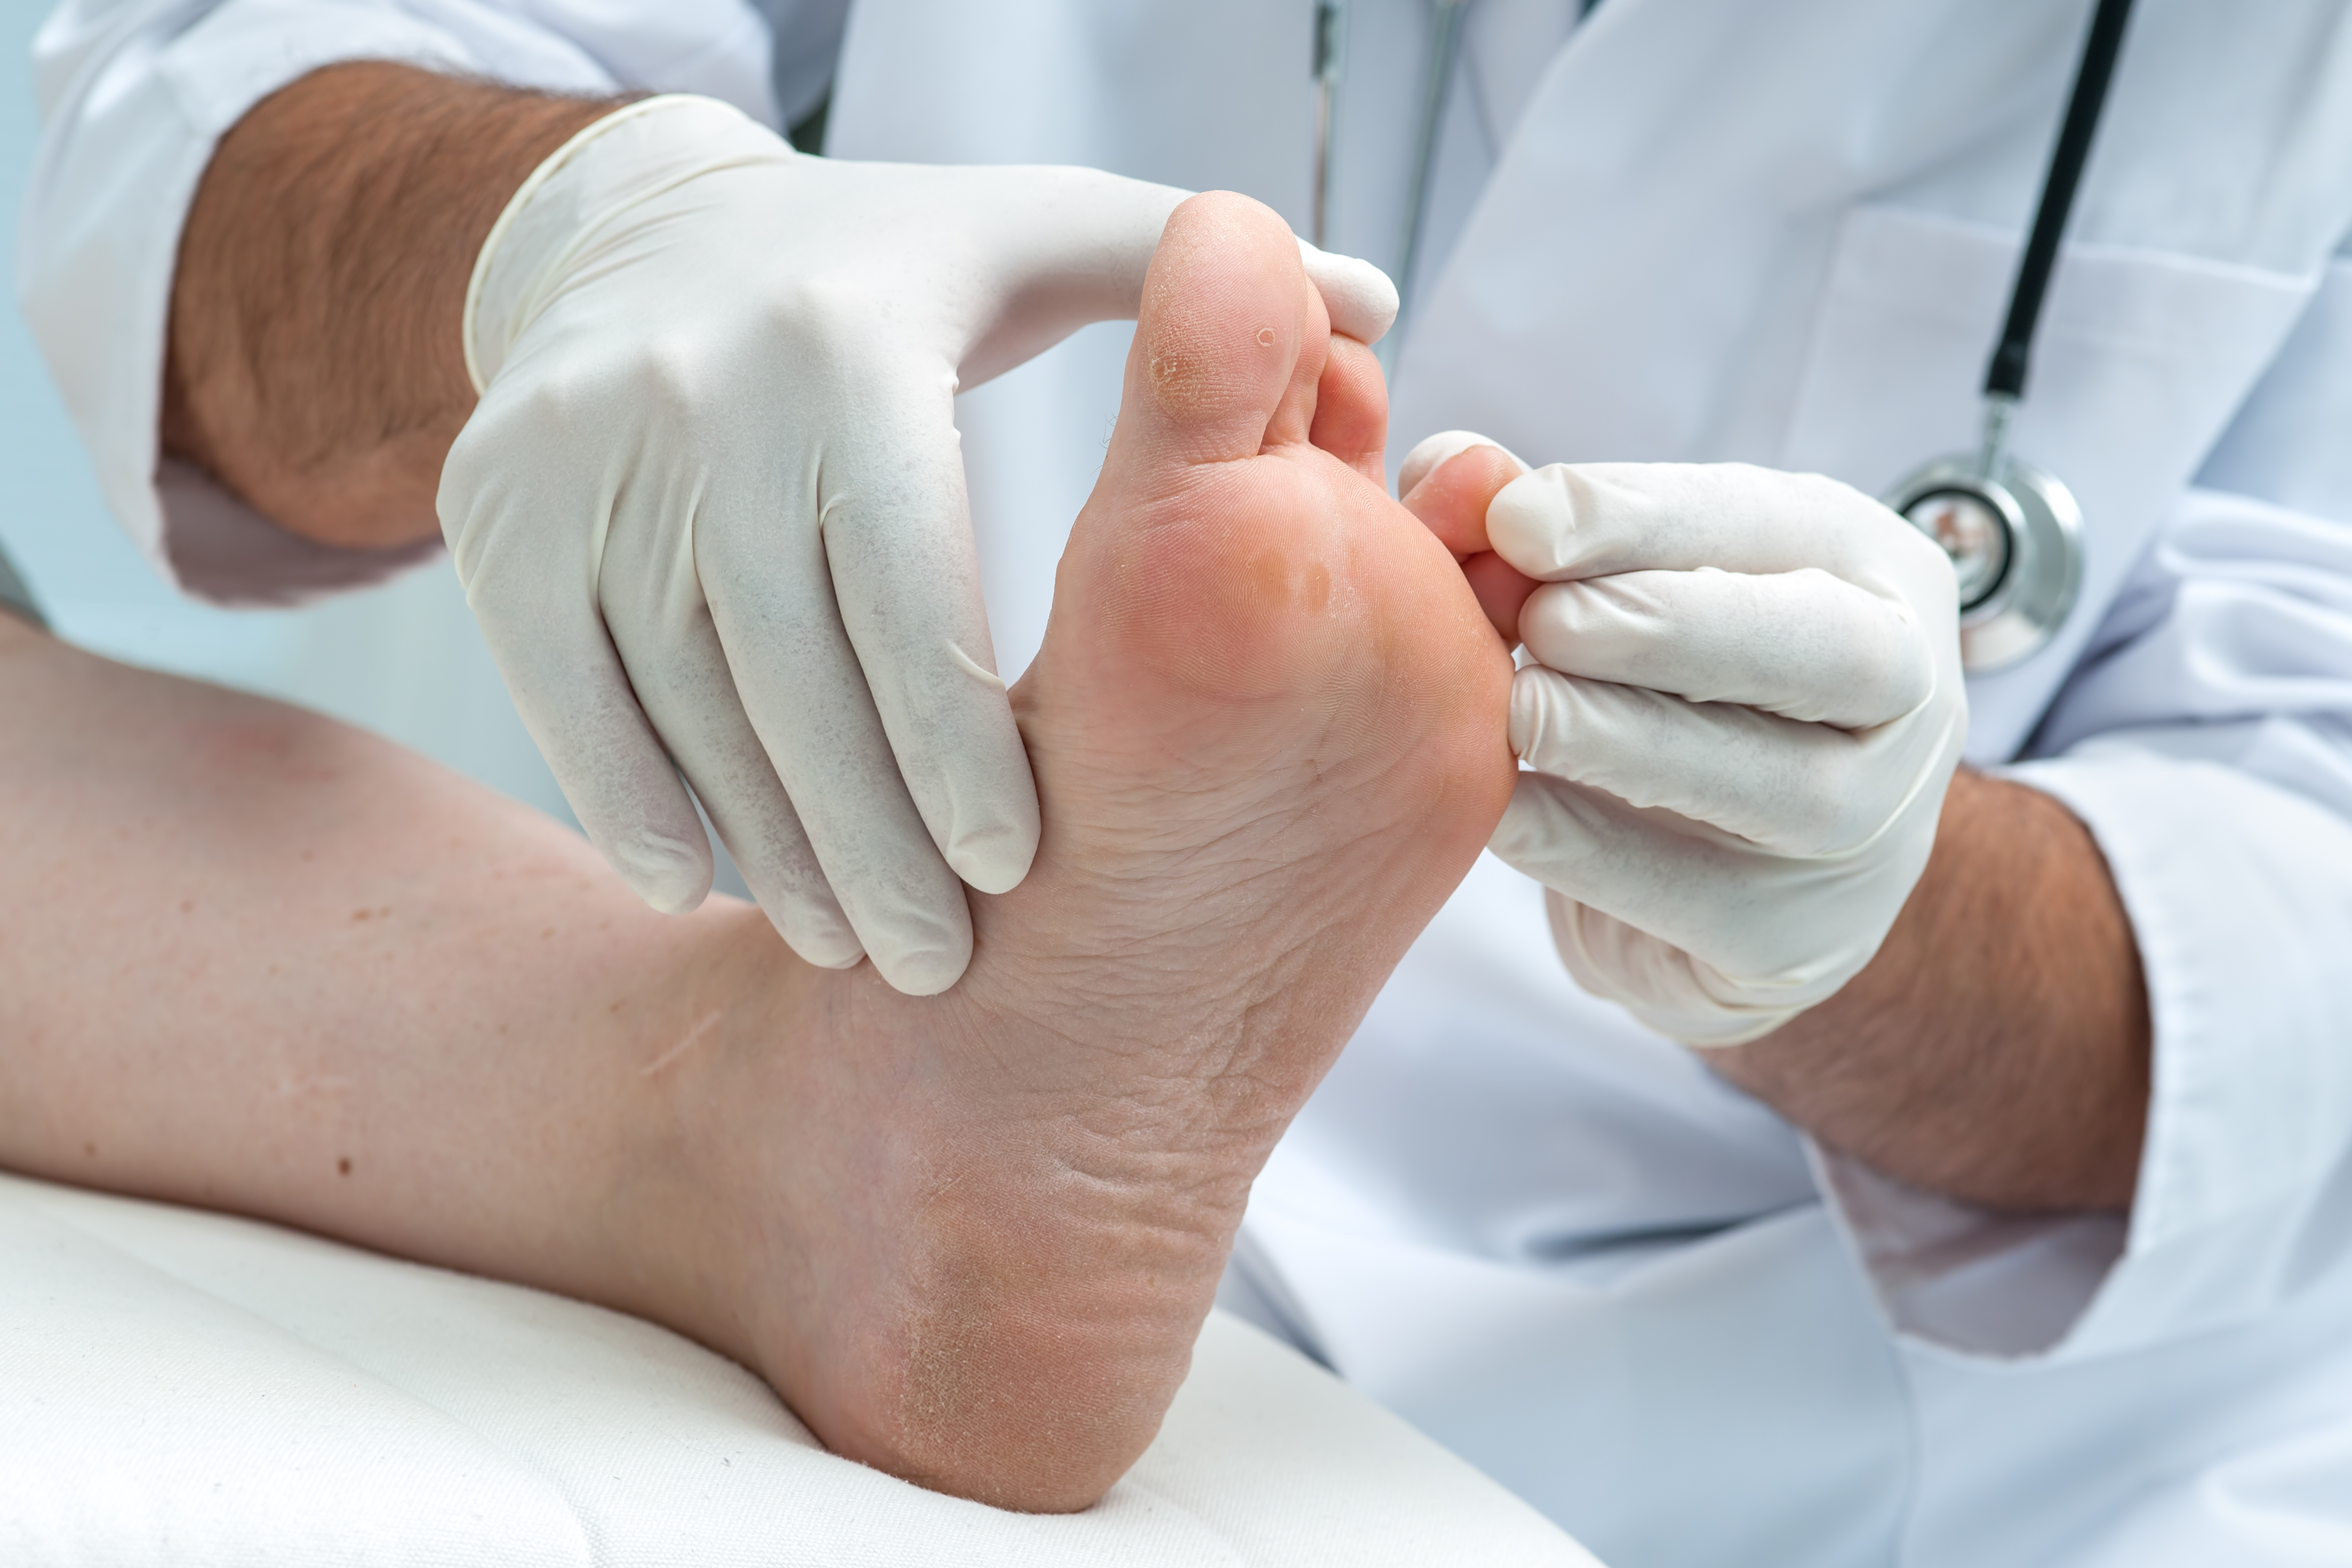 Jammed Toe vs. Broken Toe: What You Should Know